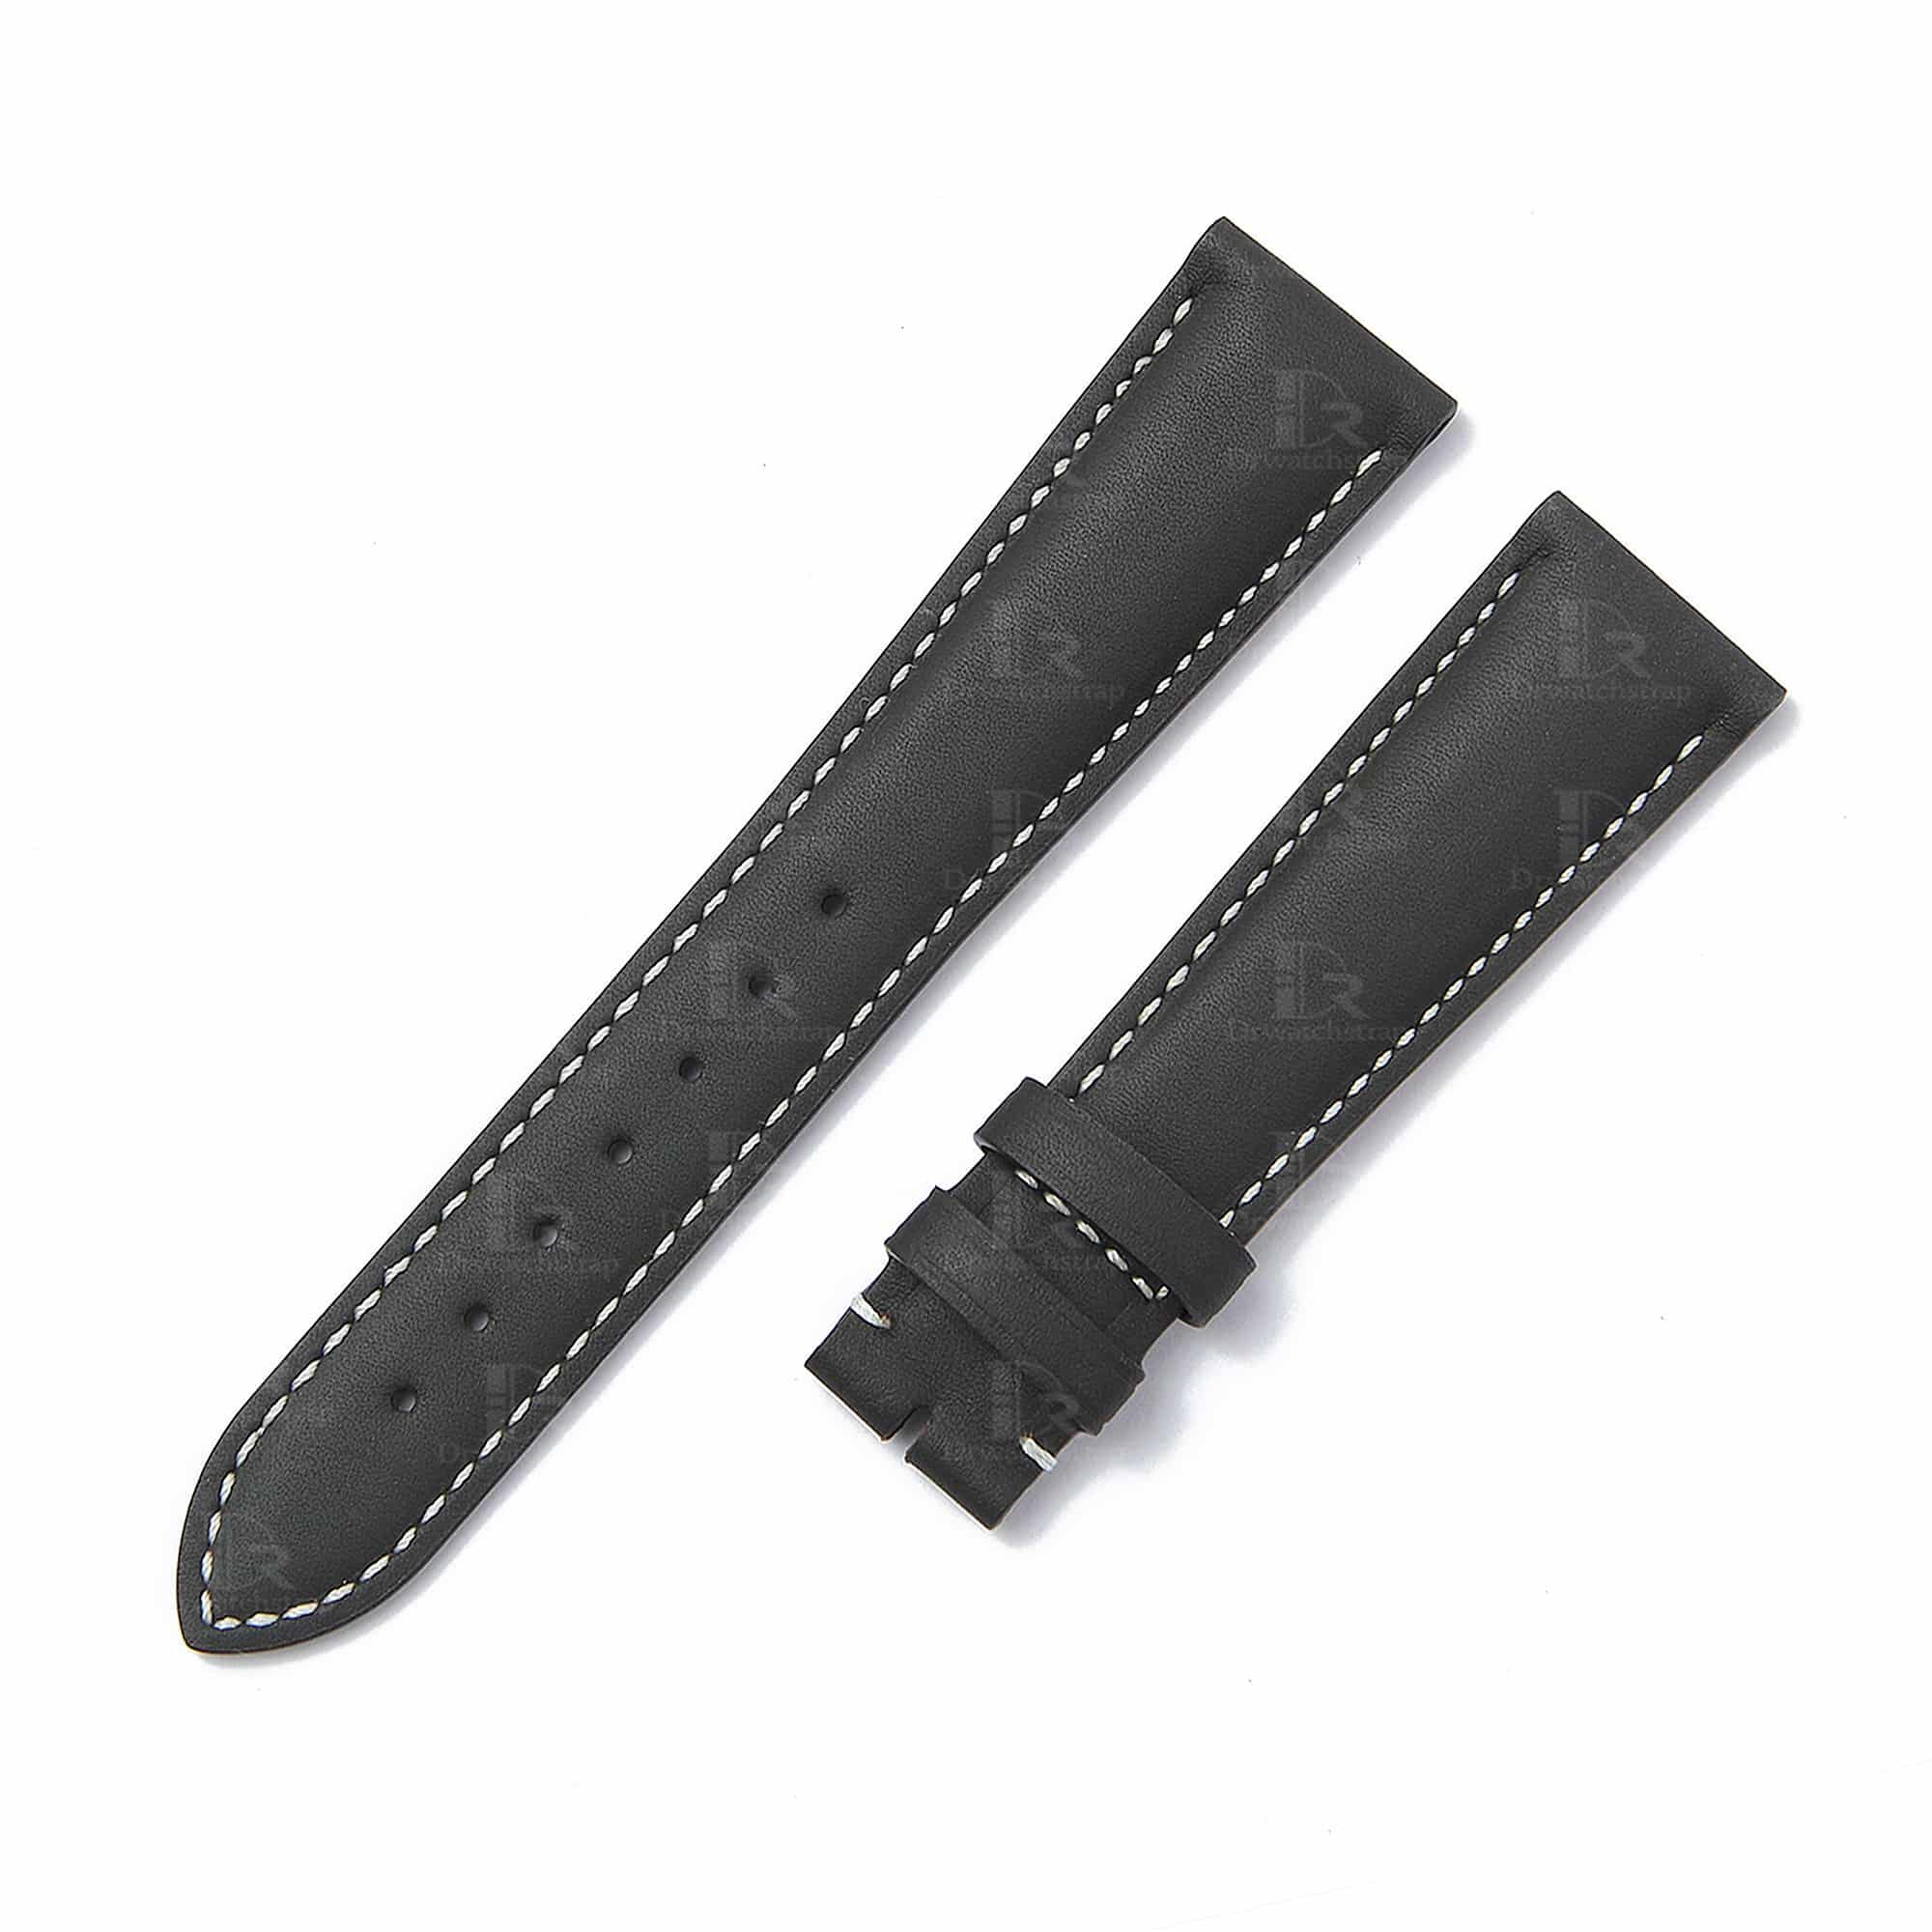 Replacement Omega leather watch band 20mm black handmade custom